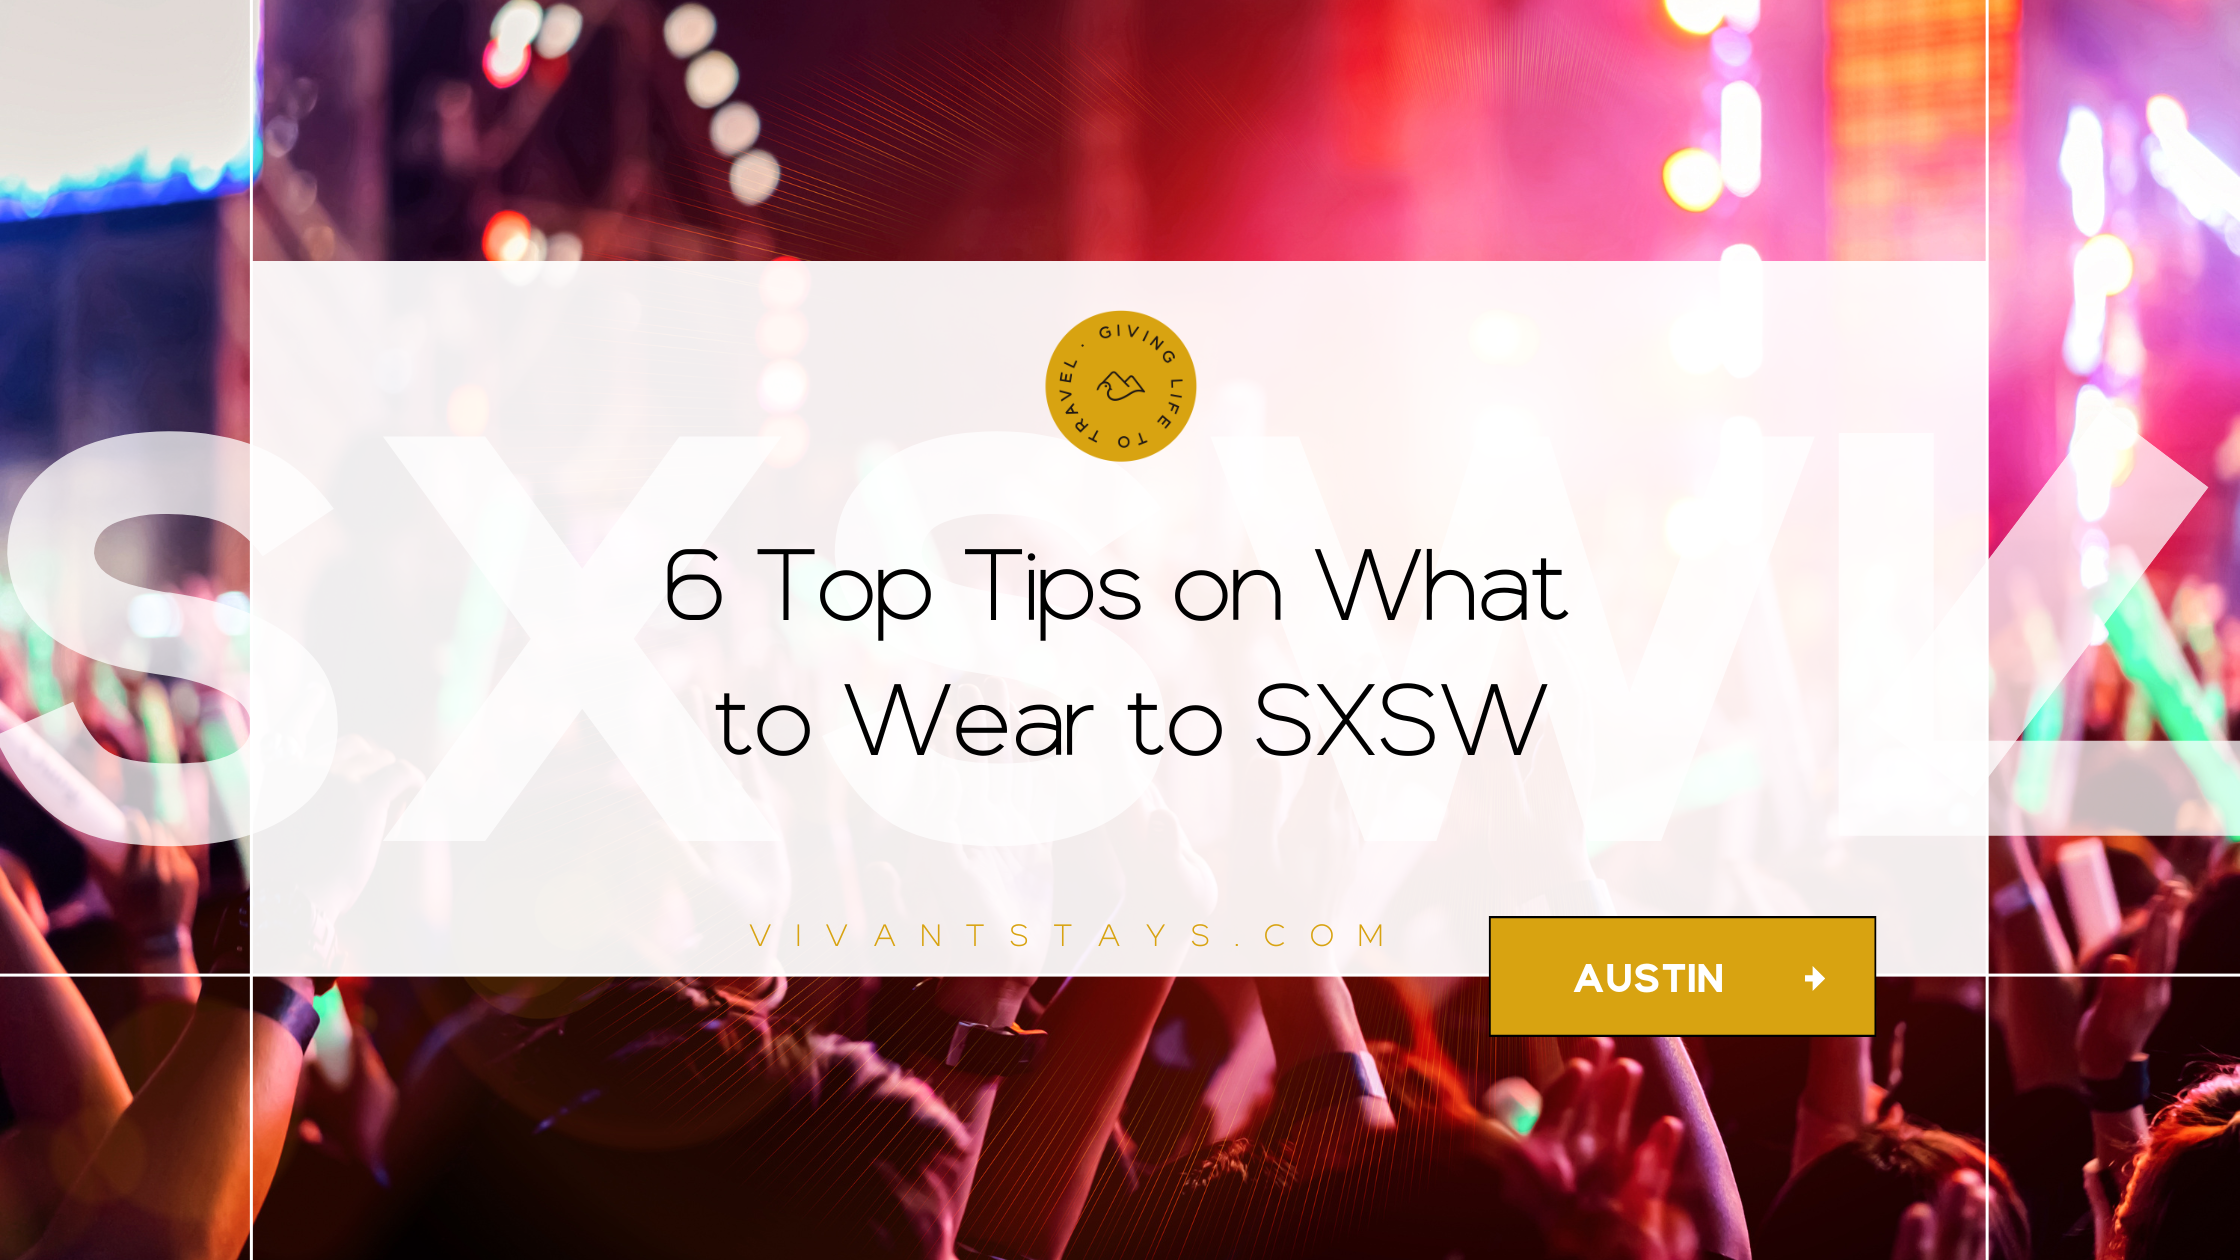 Blog banner titled "6 Top Things on What to Wear to SXSW"